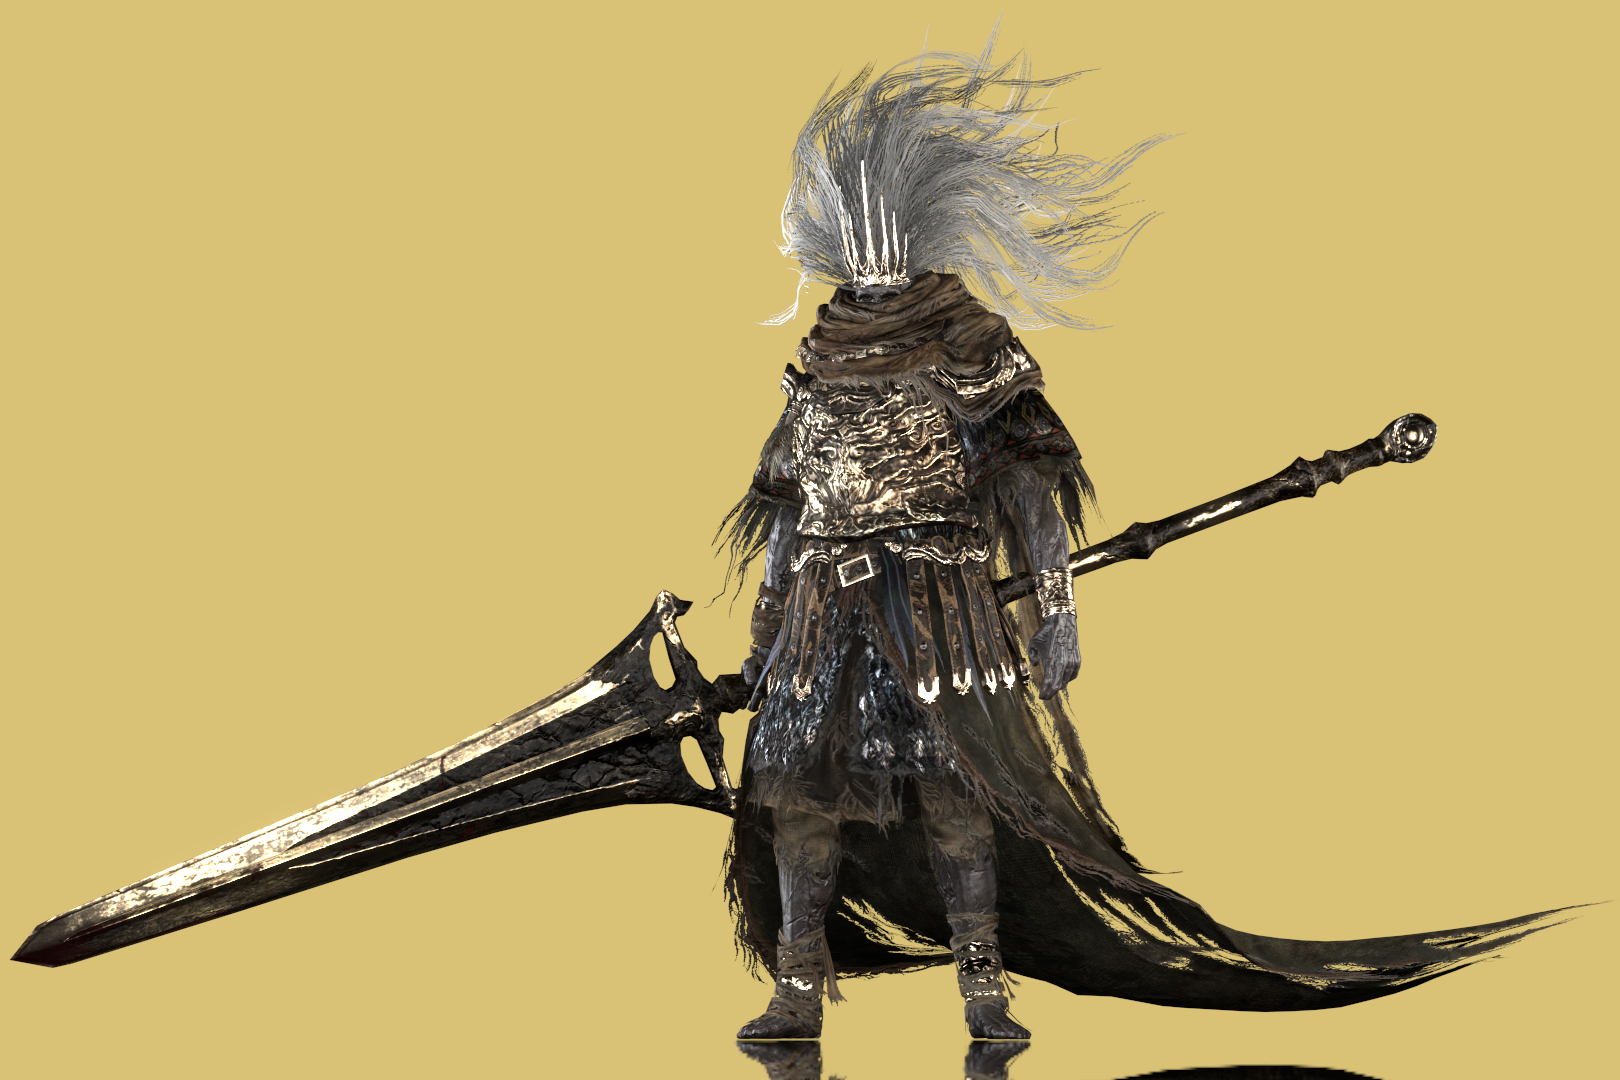 Nameless King by Yare-Yare-Dong on DeviantArt